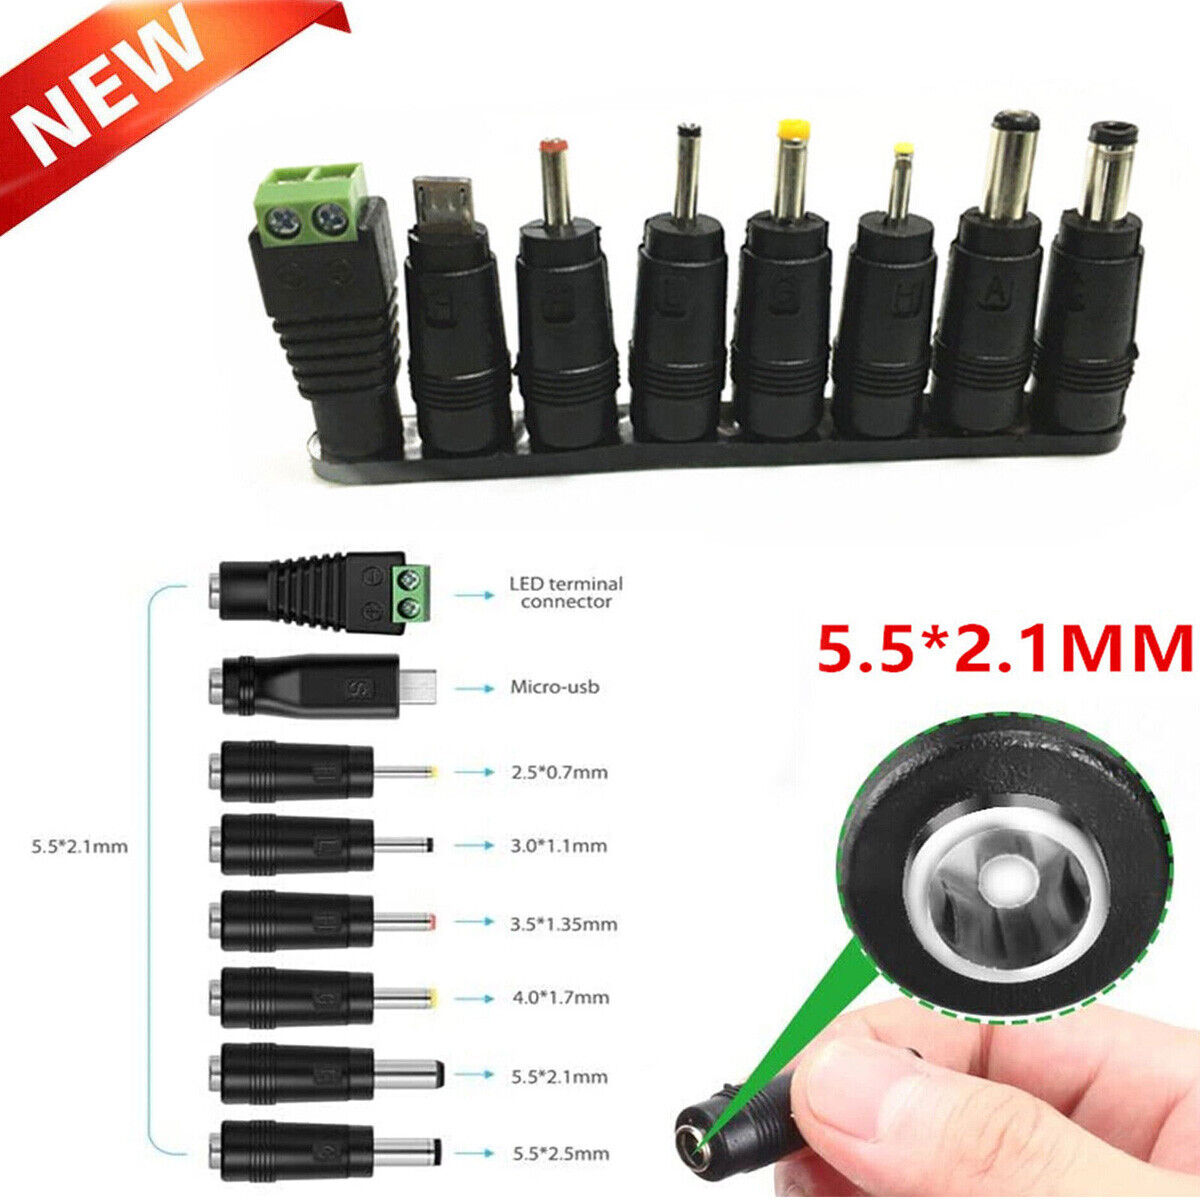 8Pcs AC DC Power Charger Adapter Tips Jack Plugs Universal For Laptop Notebook